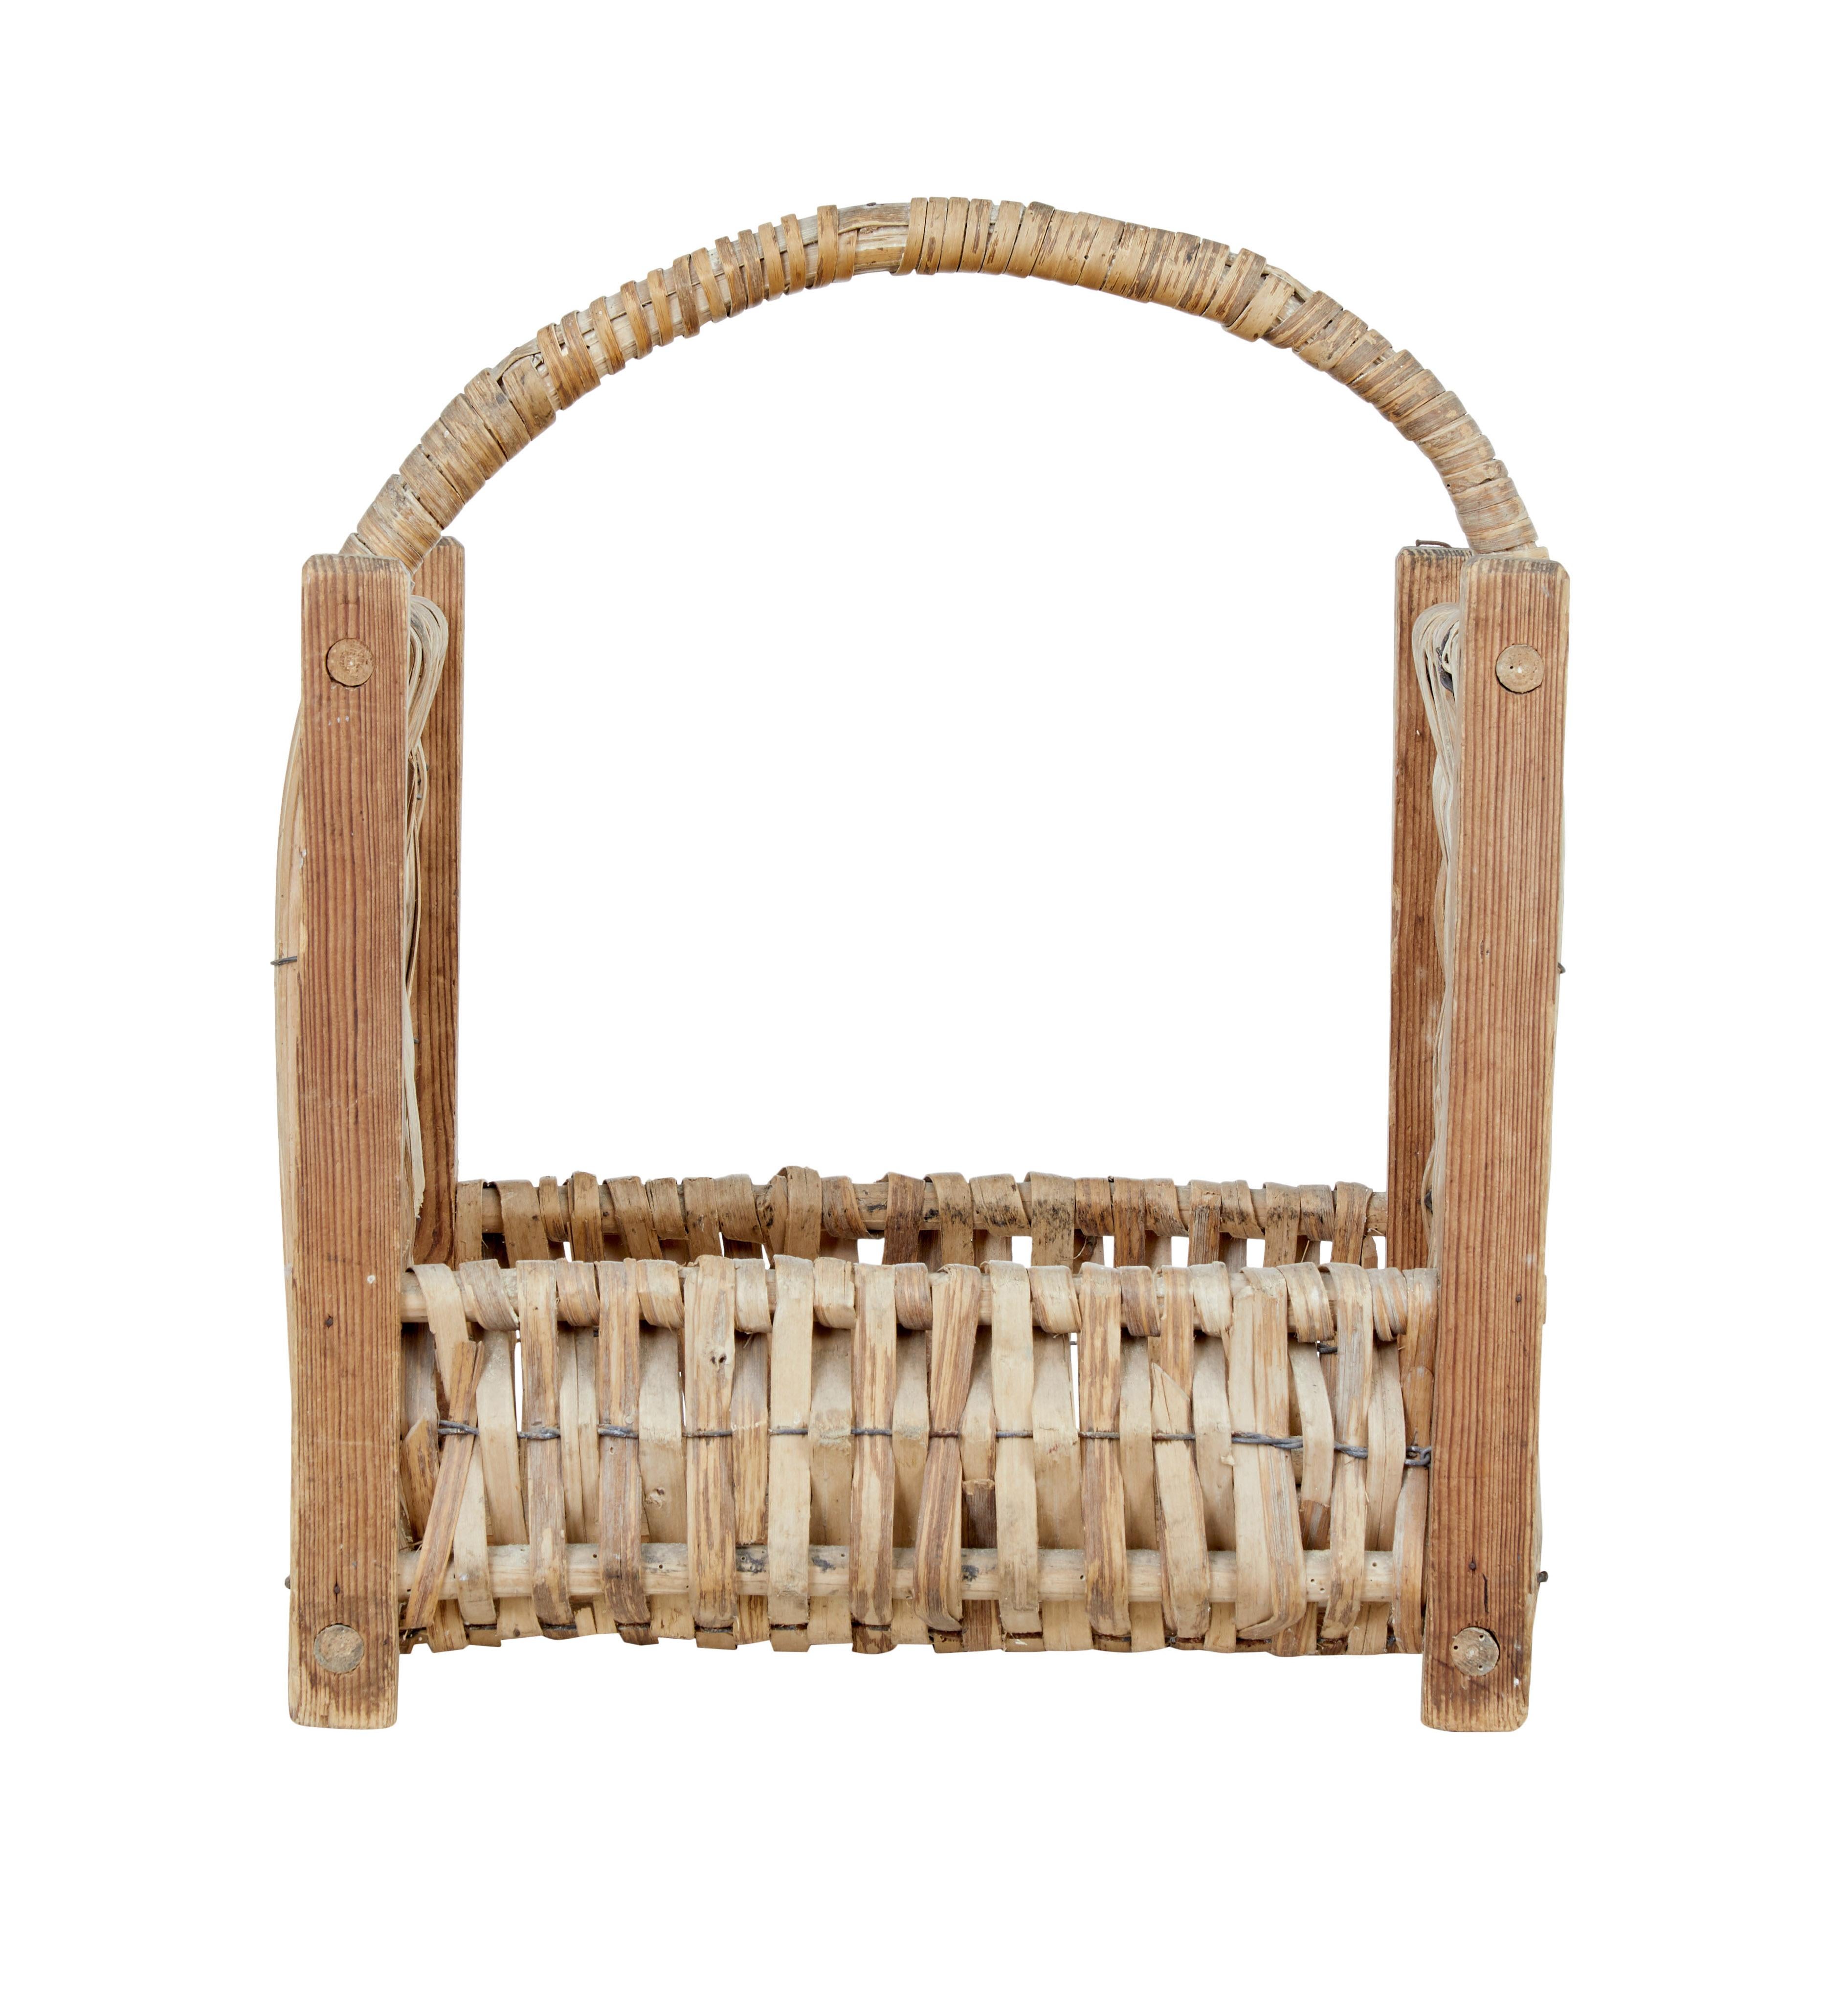 Late 19th century pine and wicker log basket circa 1890.

Fine example of Scandinavian pine craft work. Pine frame secured by dowel with original wicker weave. Ideal for use as a log basket or for decoration.

Expected minor losses to cane, but